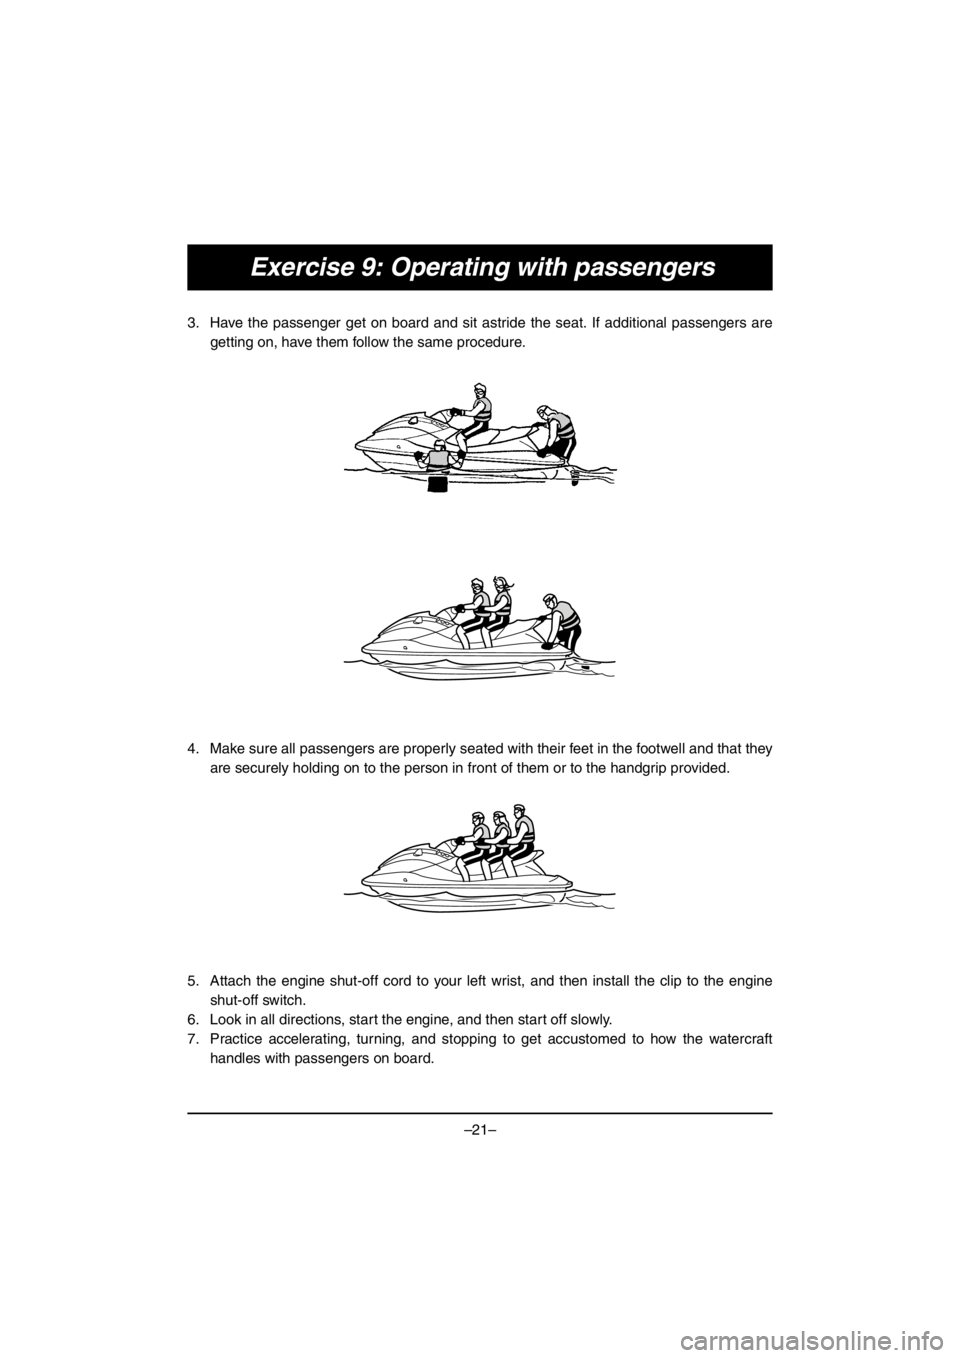 YAMAHA VX CRUISER HO 2016 Owners Manual –21–
Exercise 9: Operating with passengers
3. Have the passenger get on board and sit astride the seat. If additional passengers are
getting on, have them follow the same procedure. 
4. Make sure 